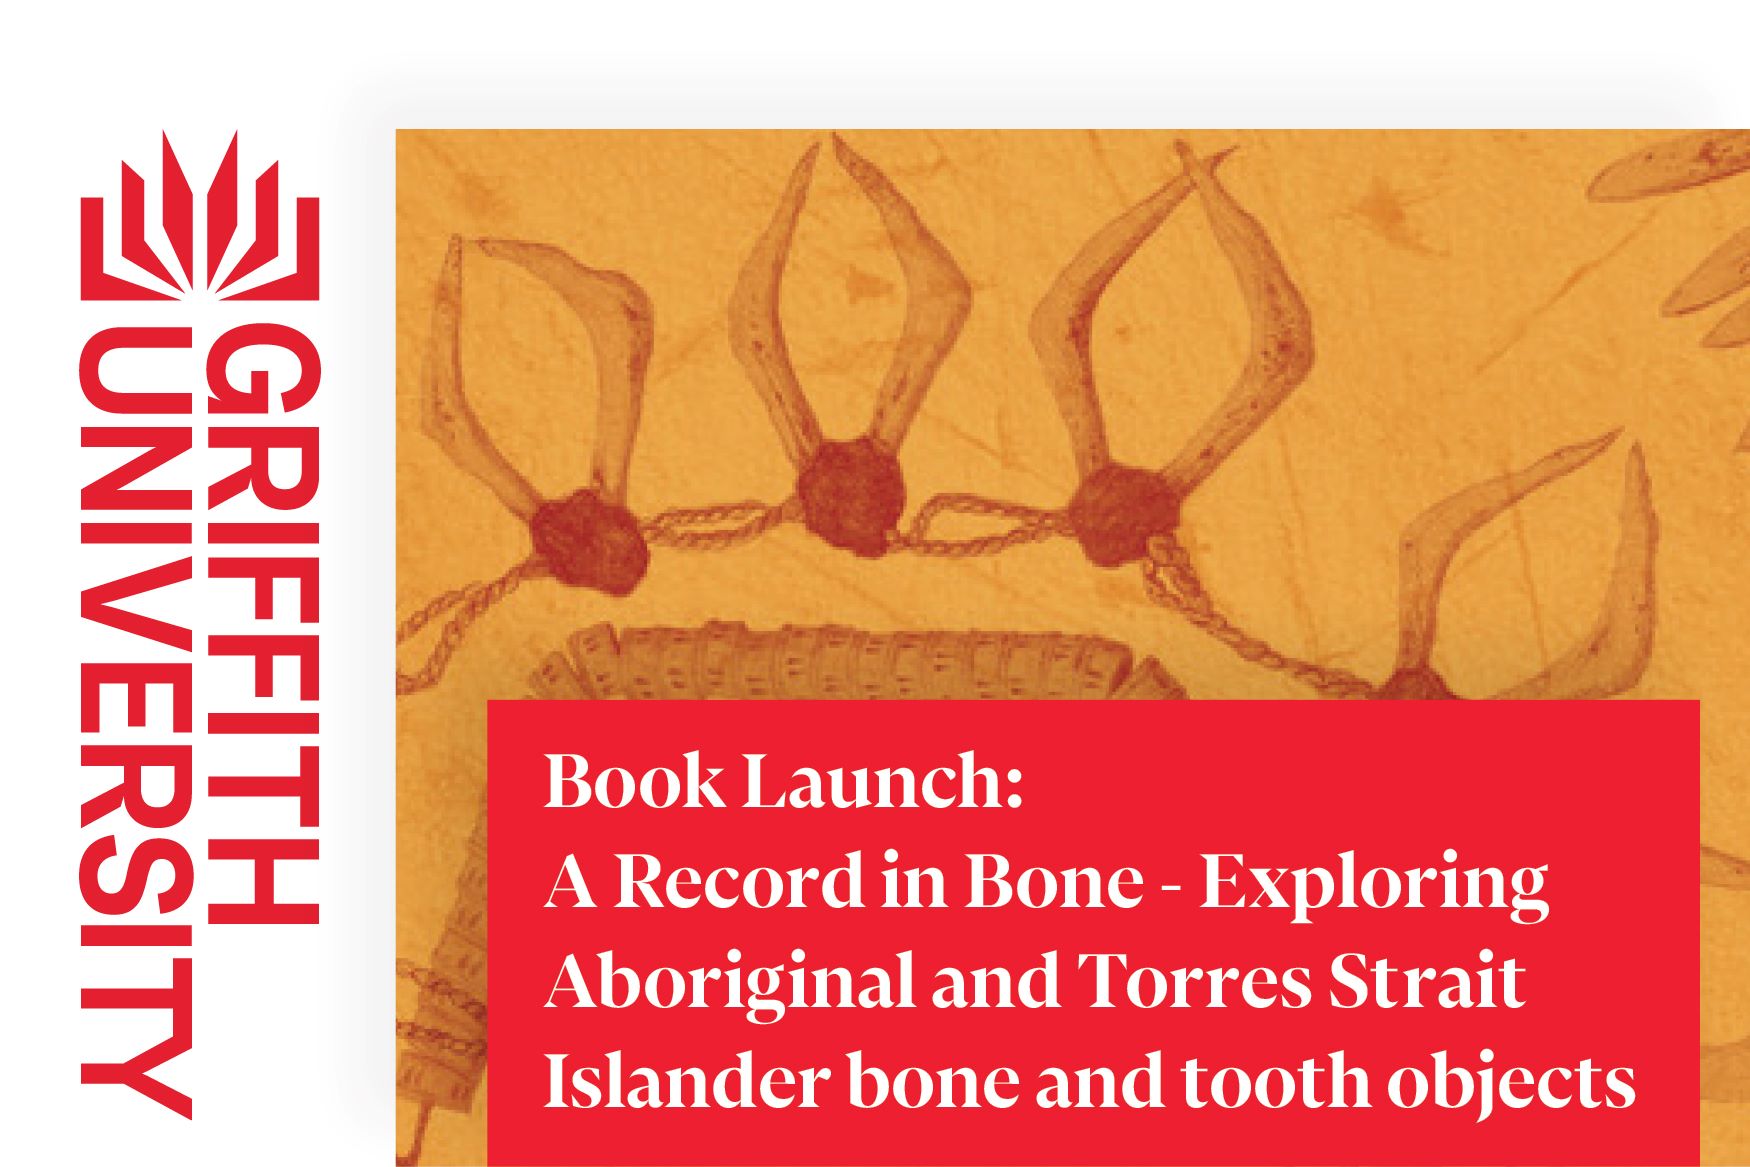 Book Launch - A Record in Bone: Exploring Aboriginal and Torres Strait Islander Bone and Tooth Objects